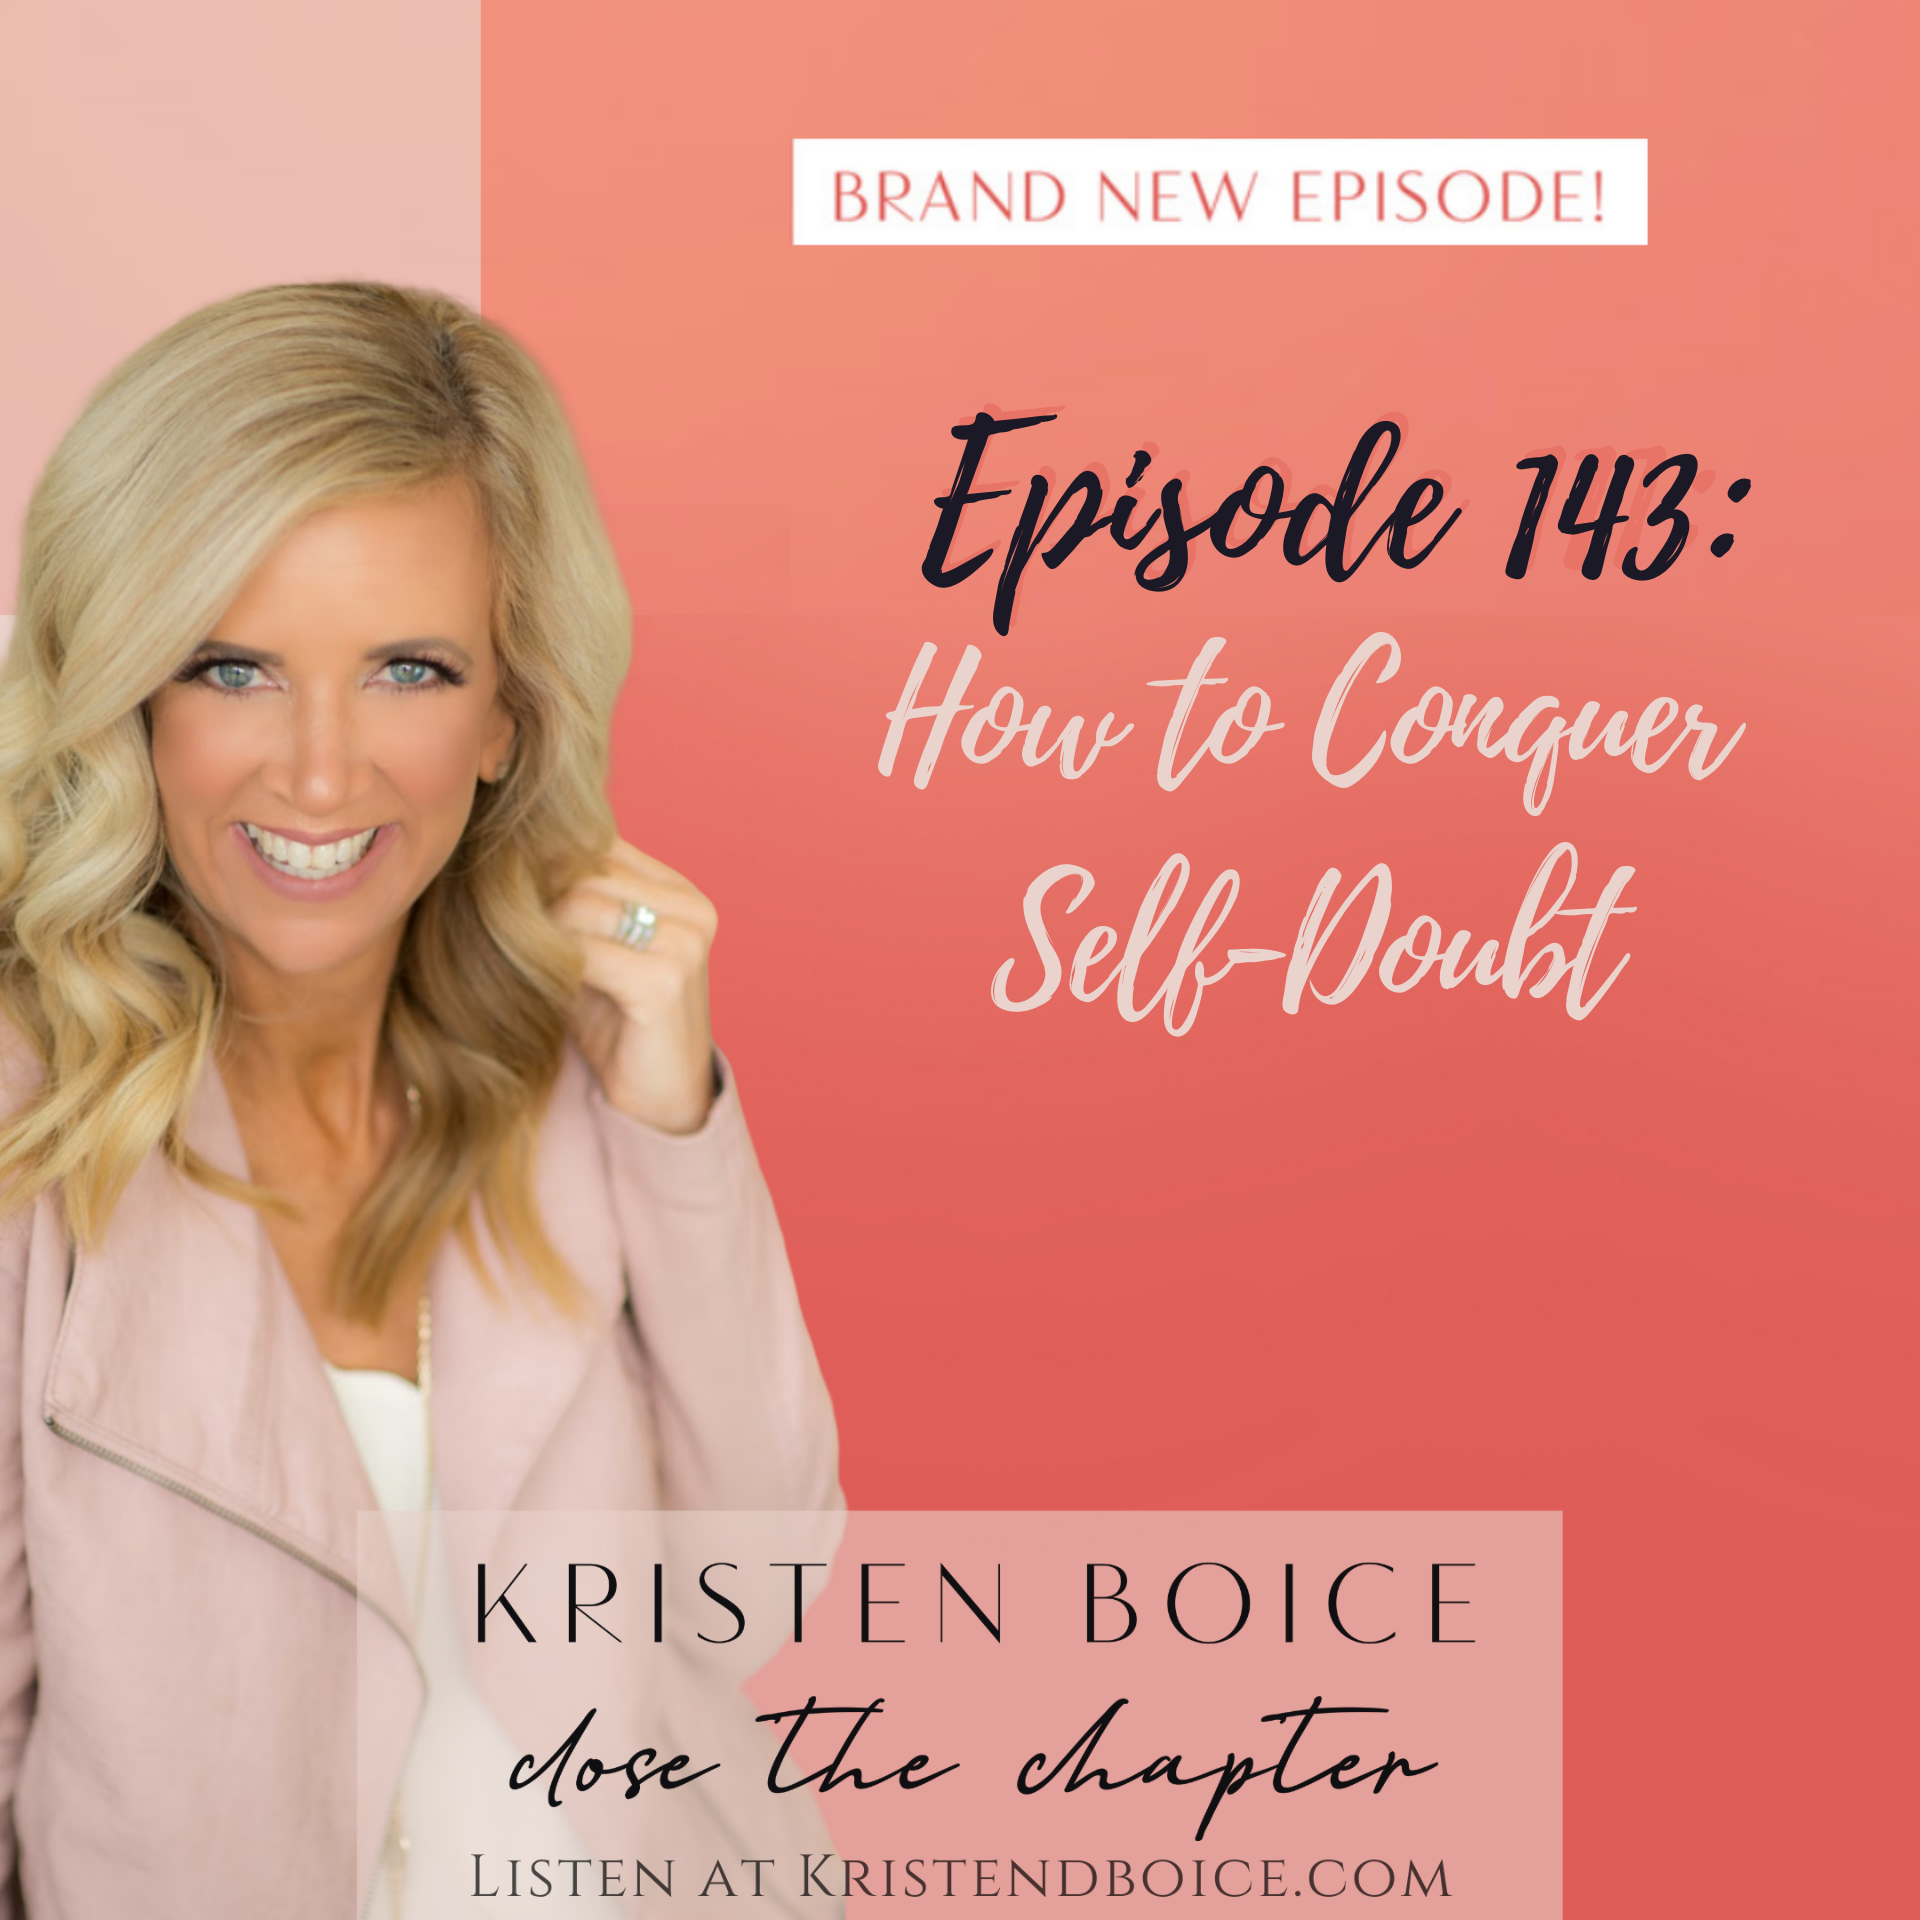 Episode 143 How to Conquer Self-doubt